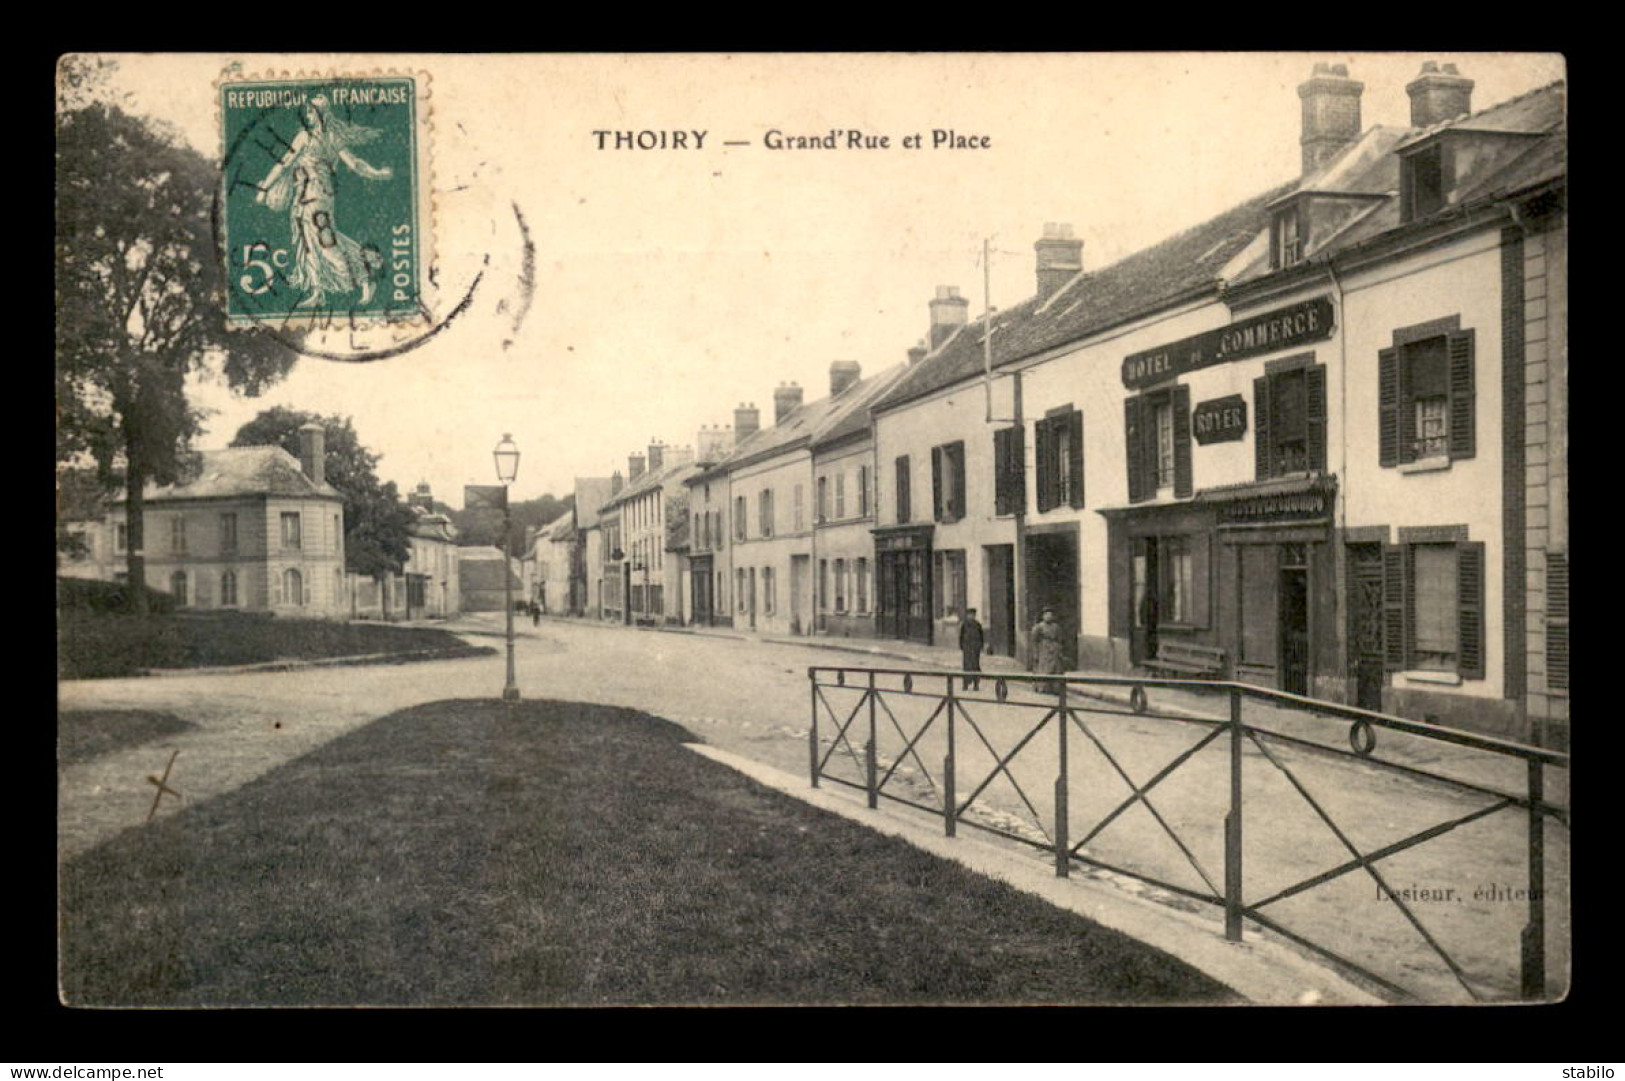 78 - THOIRY - GRAND'RUE ET PLACE - HOTEL DU COMMERCE ROYER - Thoiry